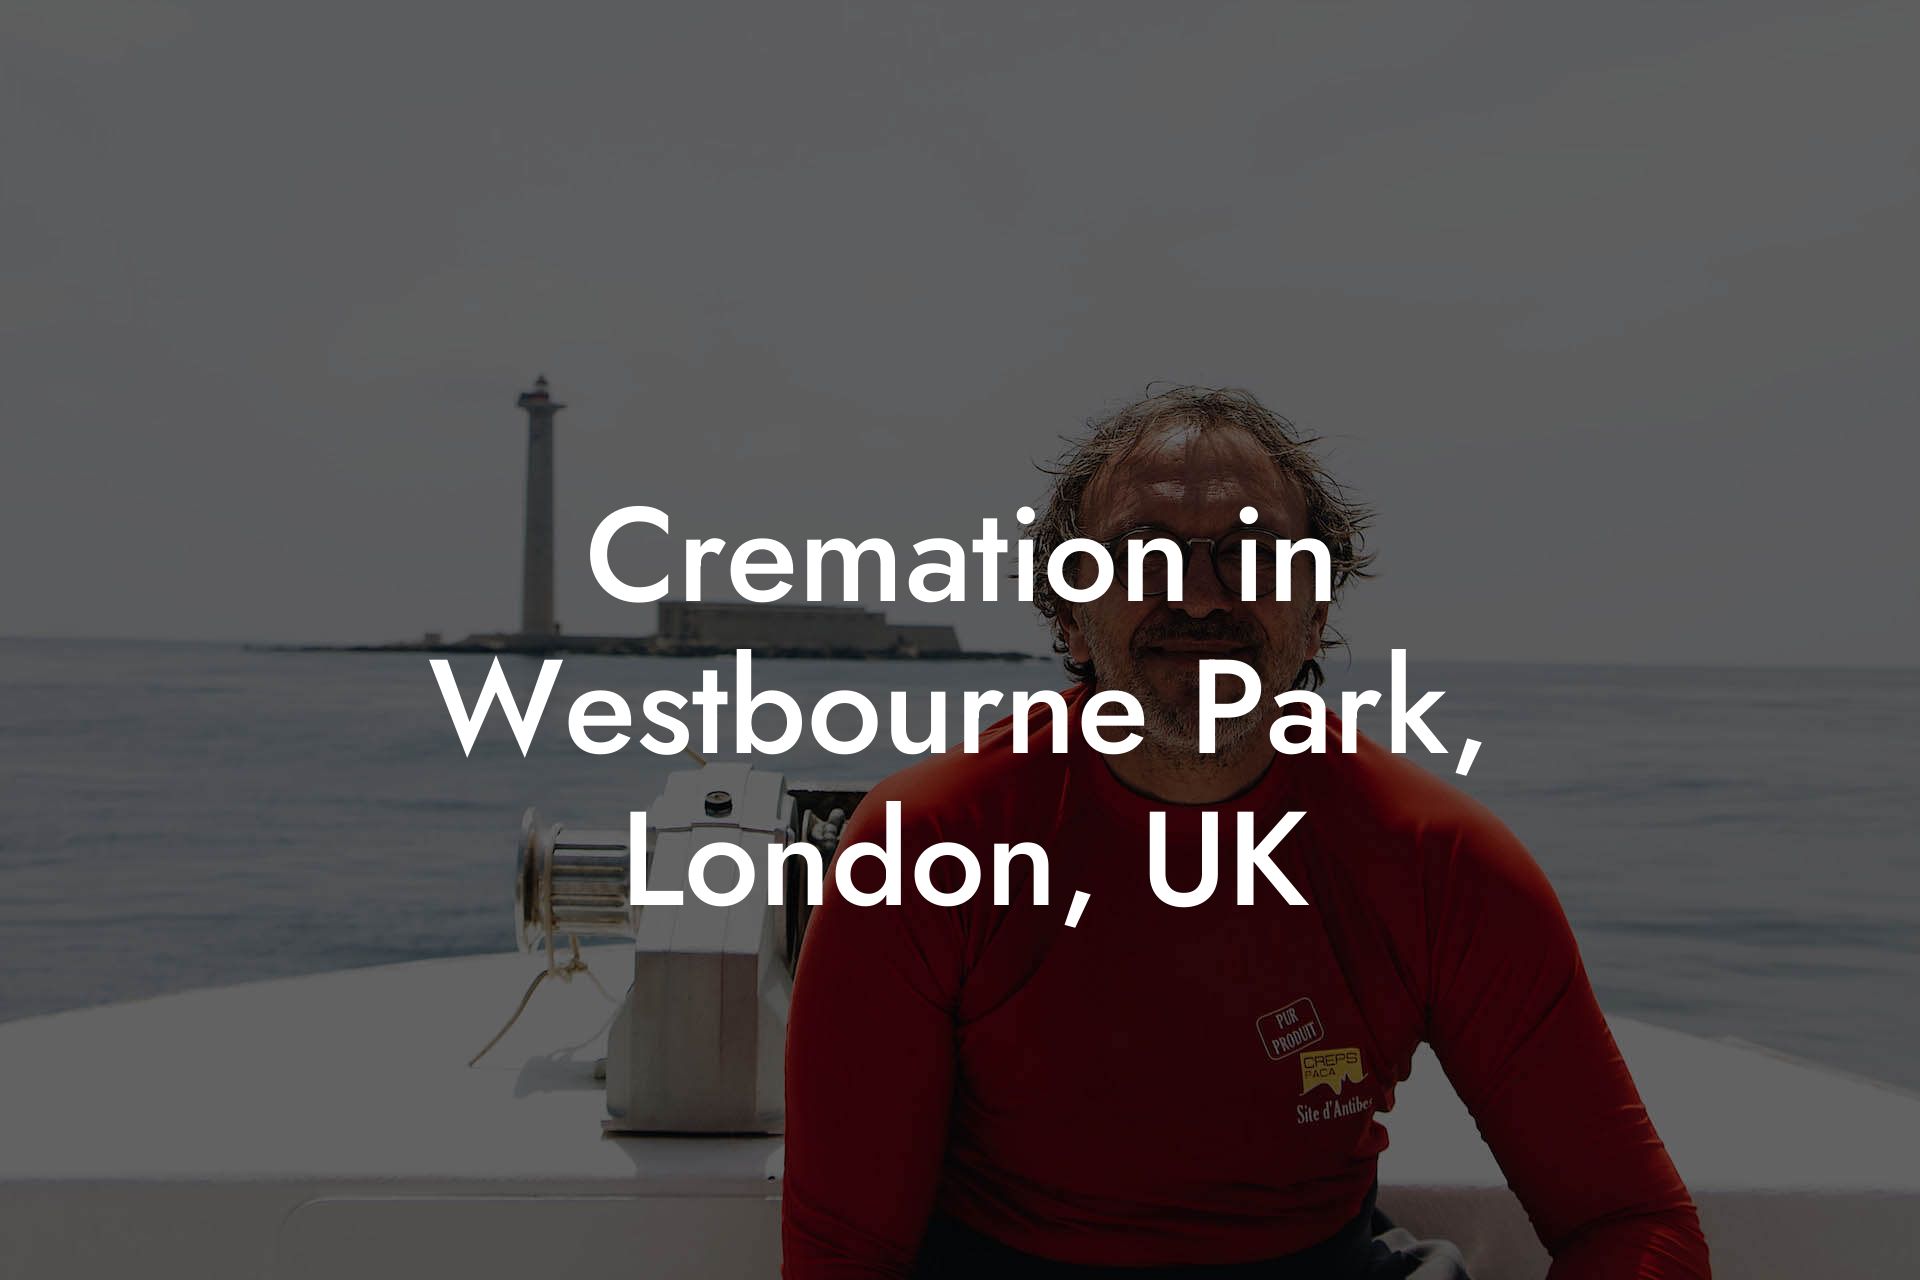 Cremation in Westbourne Park, London, UK